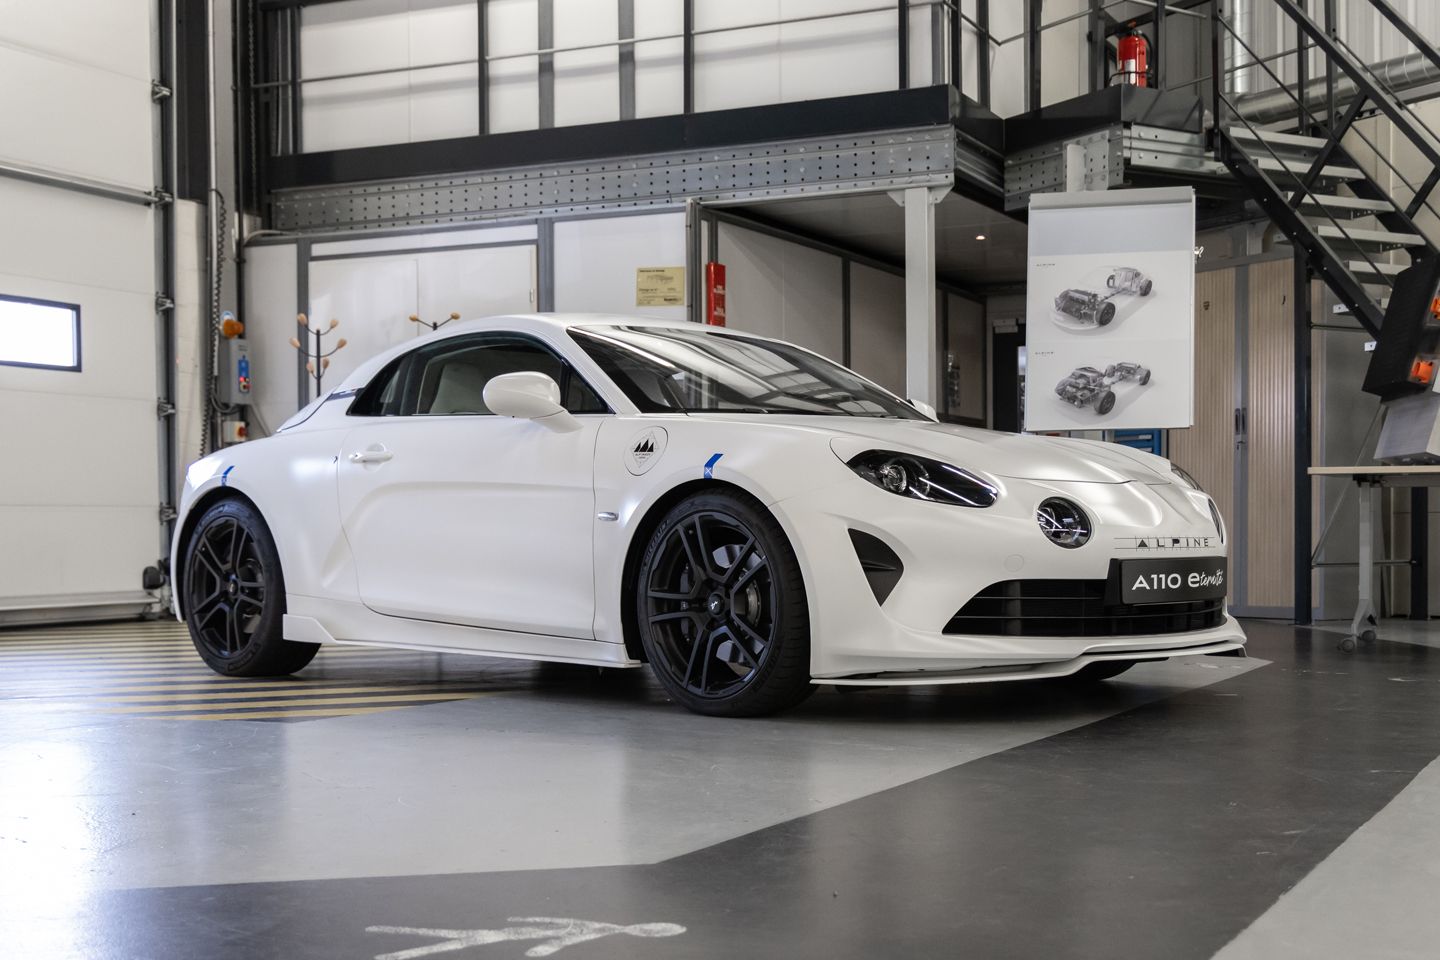 The Lifted Alpine A110 SportsX Is a Crossover We Actually Want